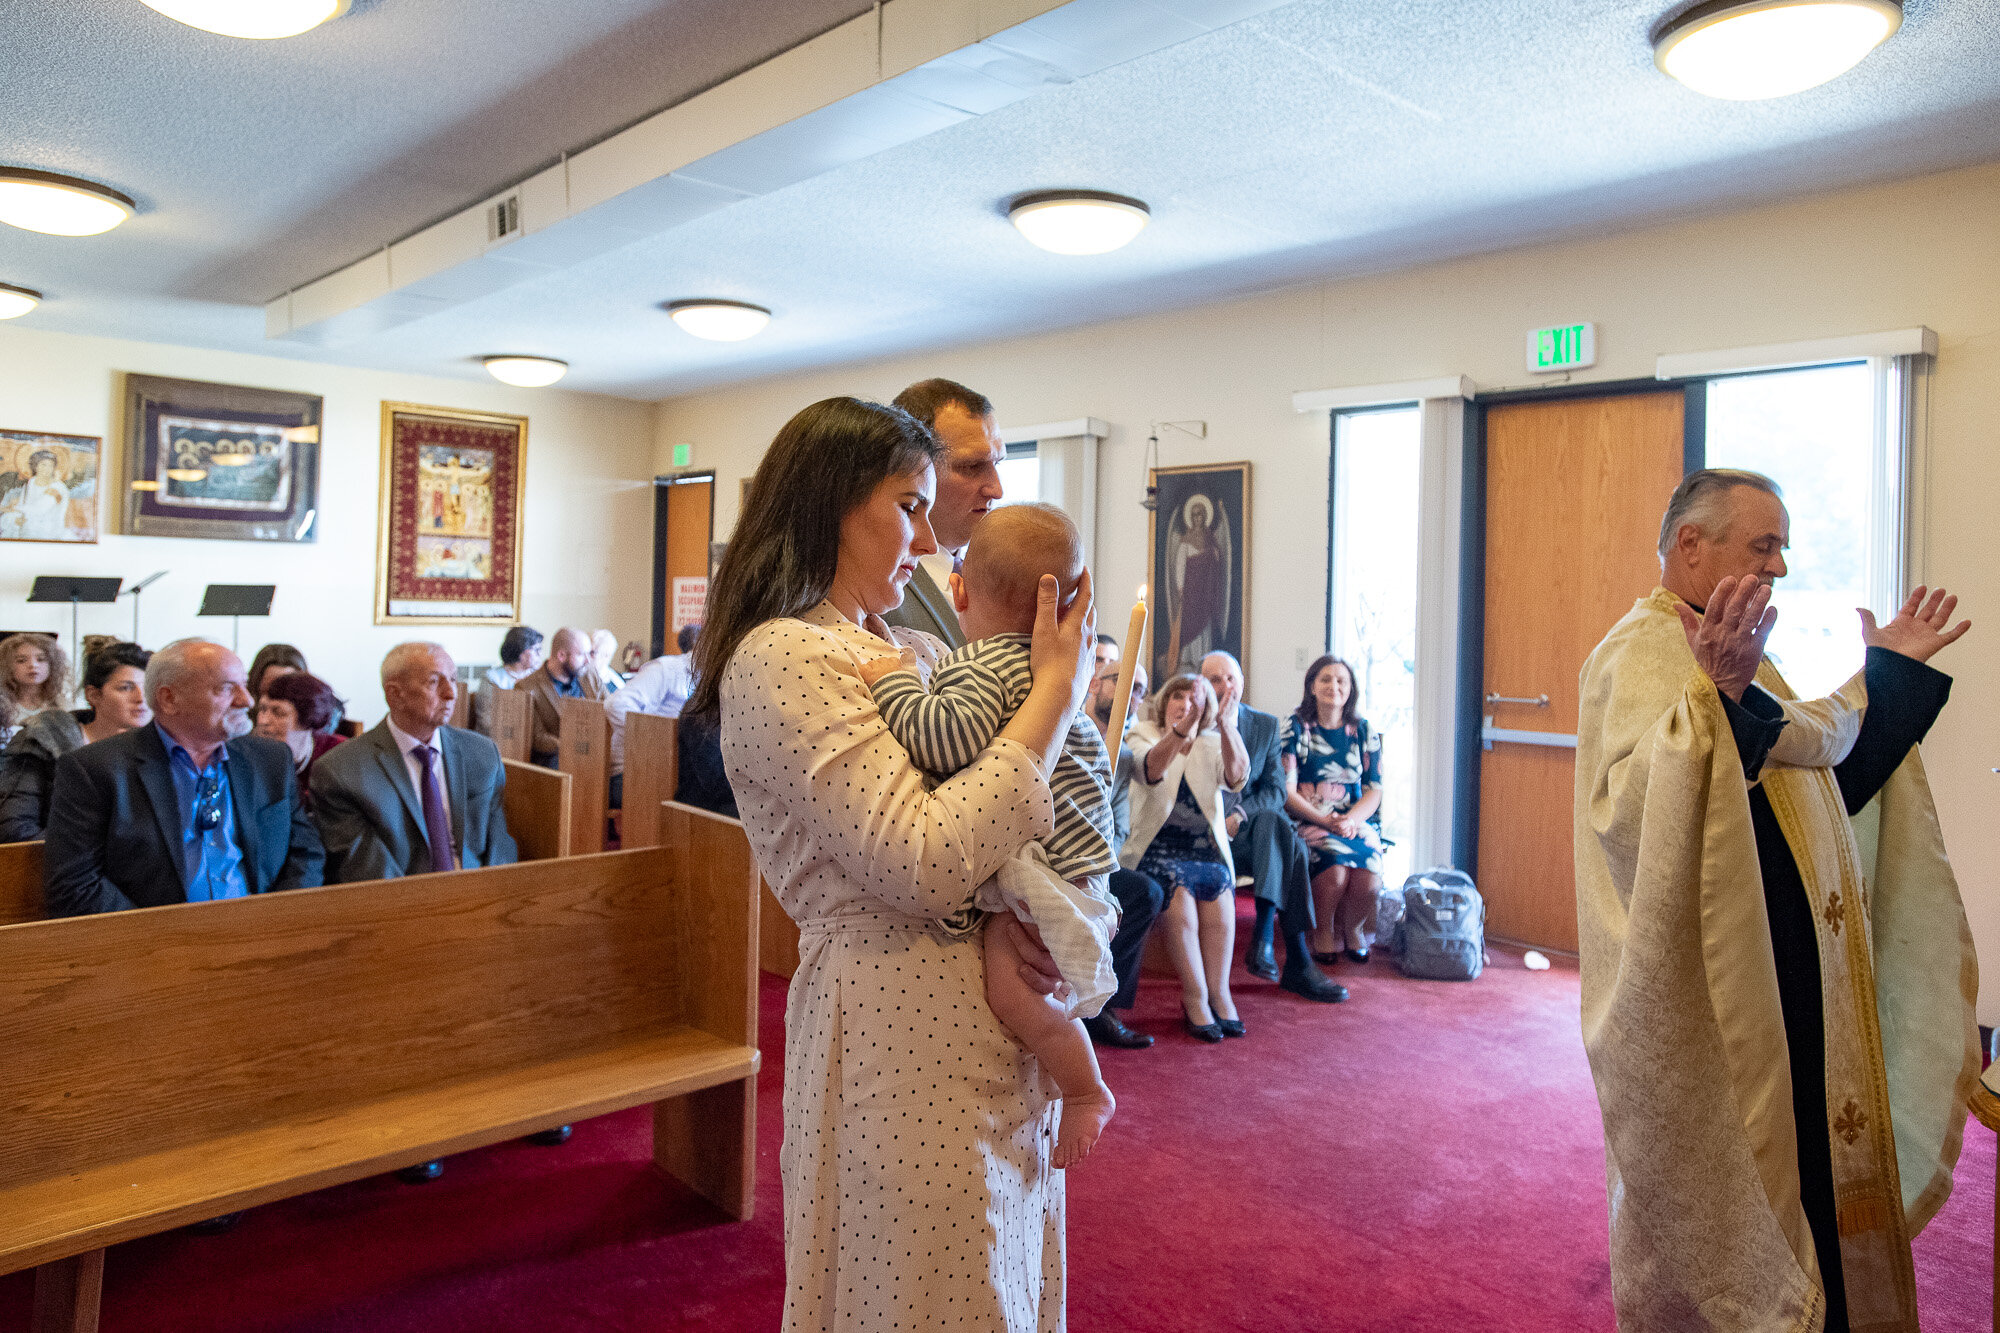 Mountain-View-Child-Baptism-Photography-family-1-11.jpg